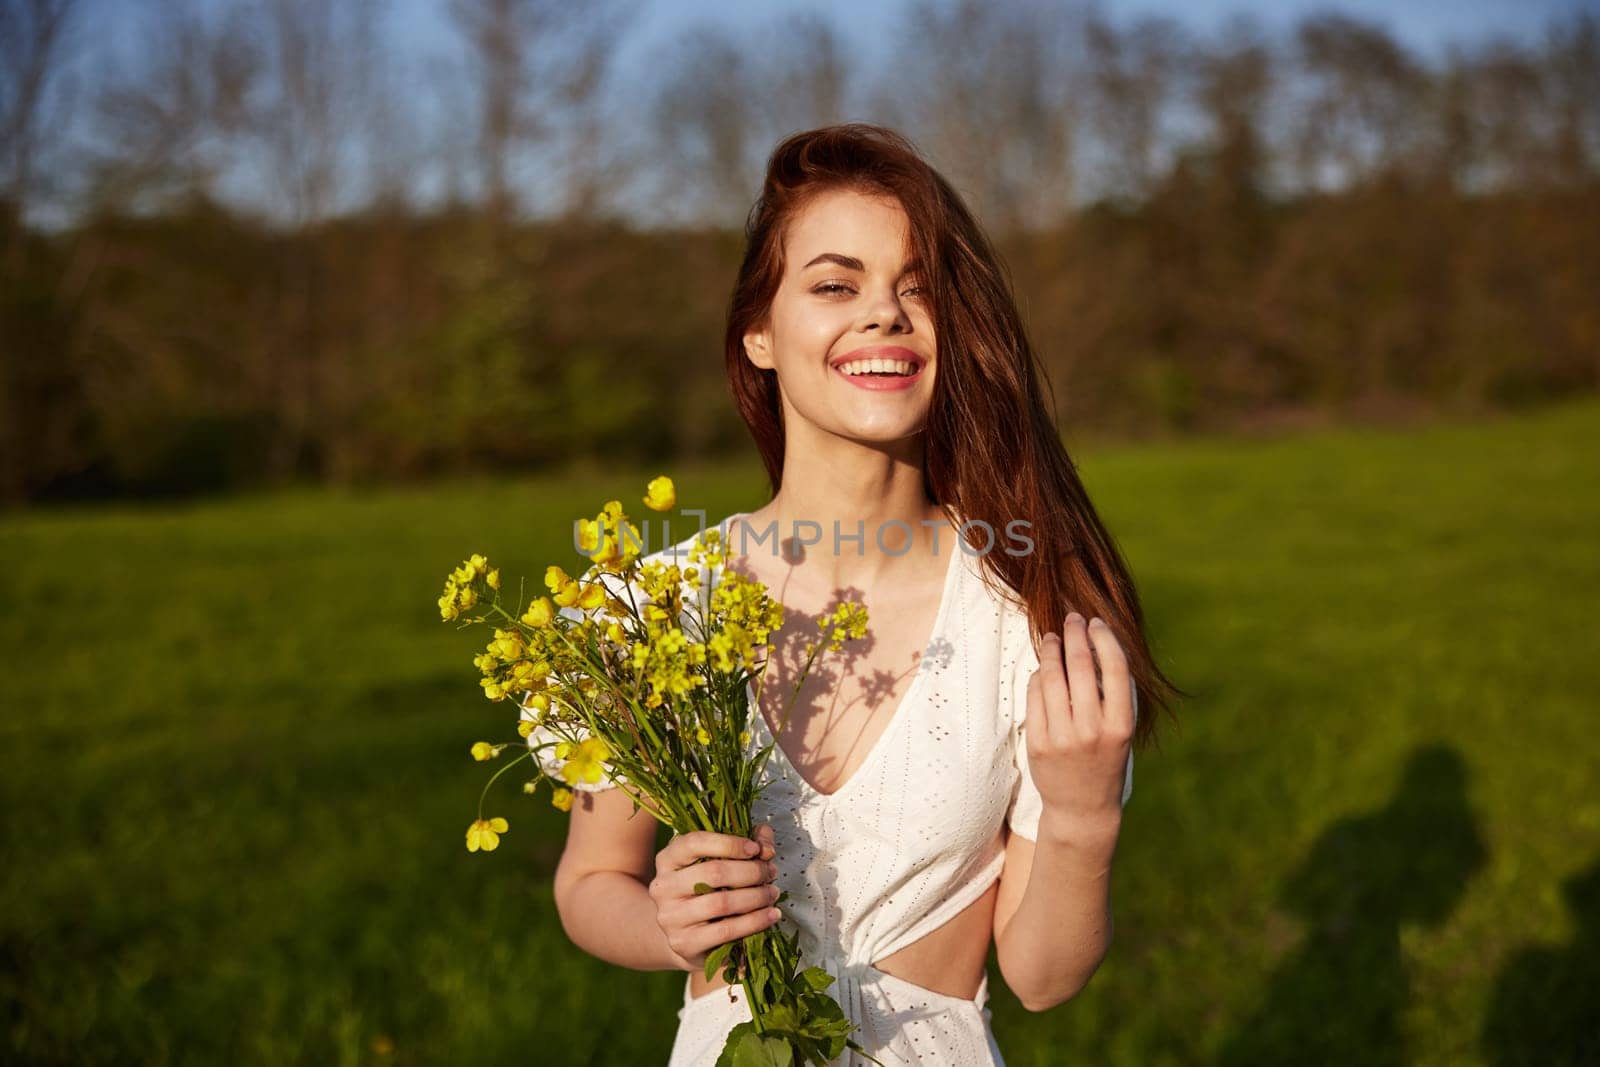 Beautiful woman in a white dress with a bouquet of yellow wildflowers walking in a field . High quality photo